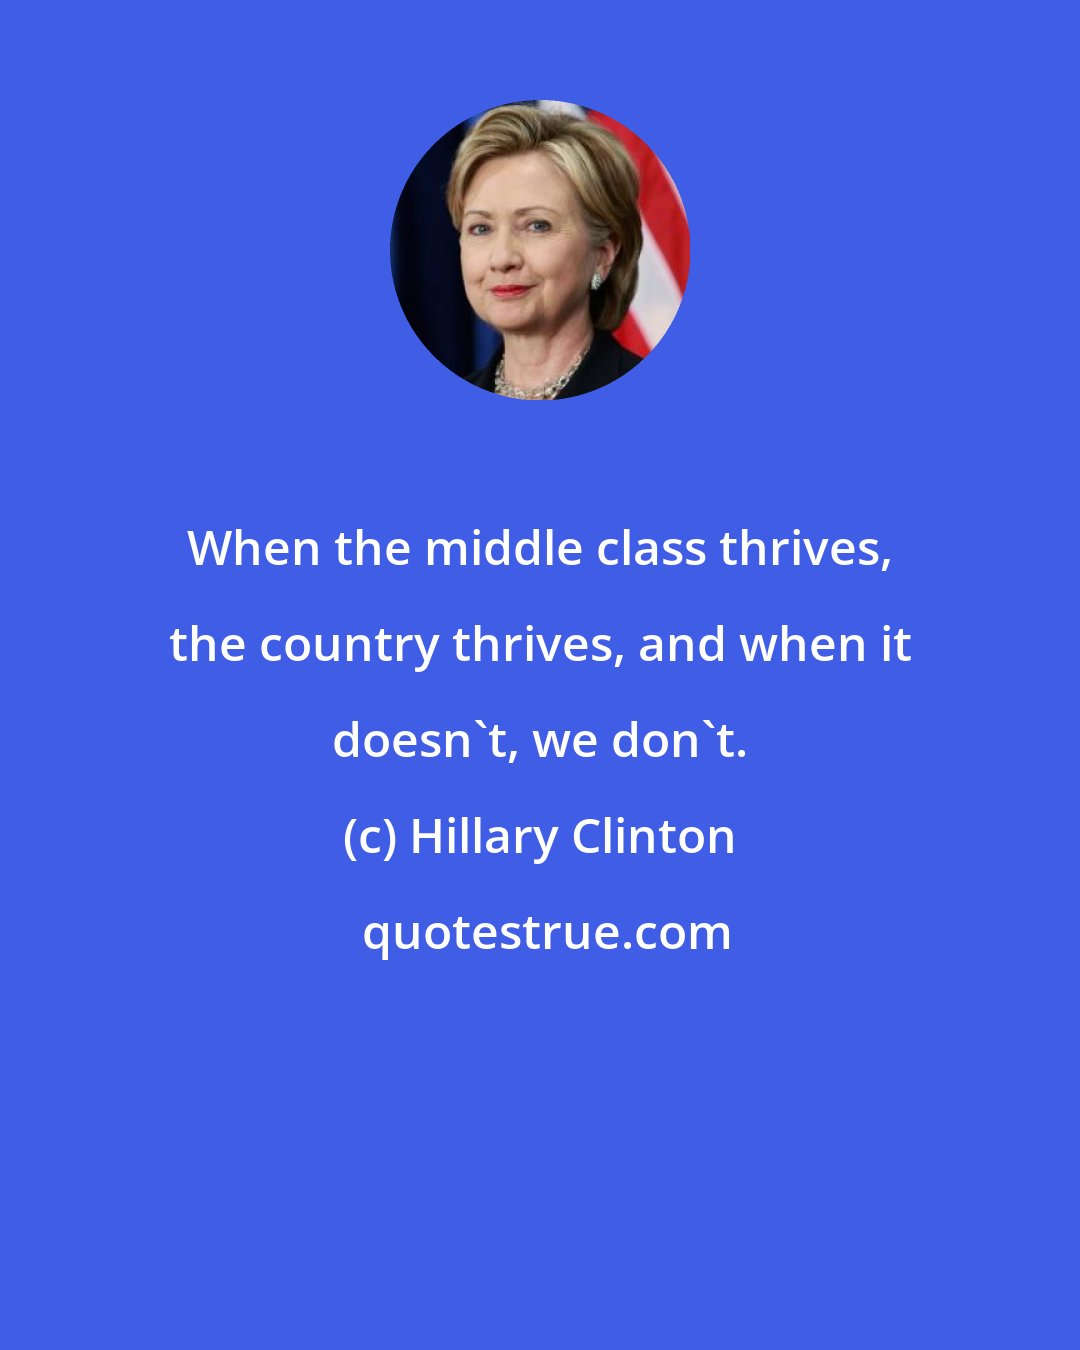 Hillary Clinton: When the middle class thrives, the country thrives, and when it doesn't, we don't.